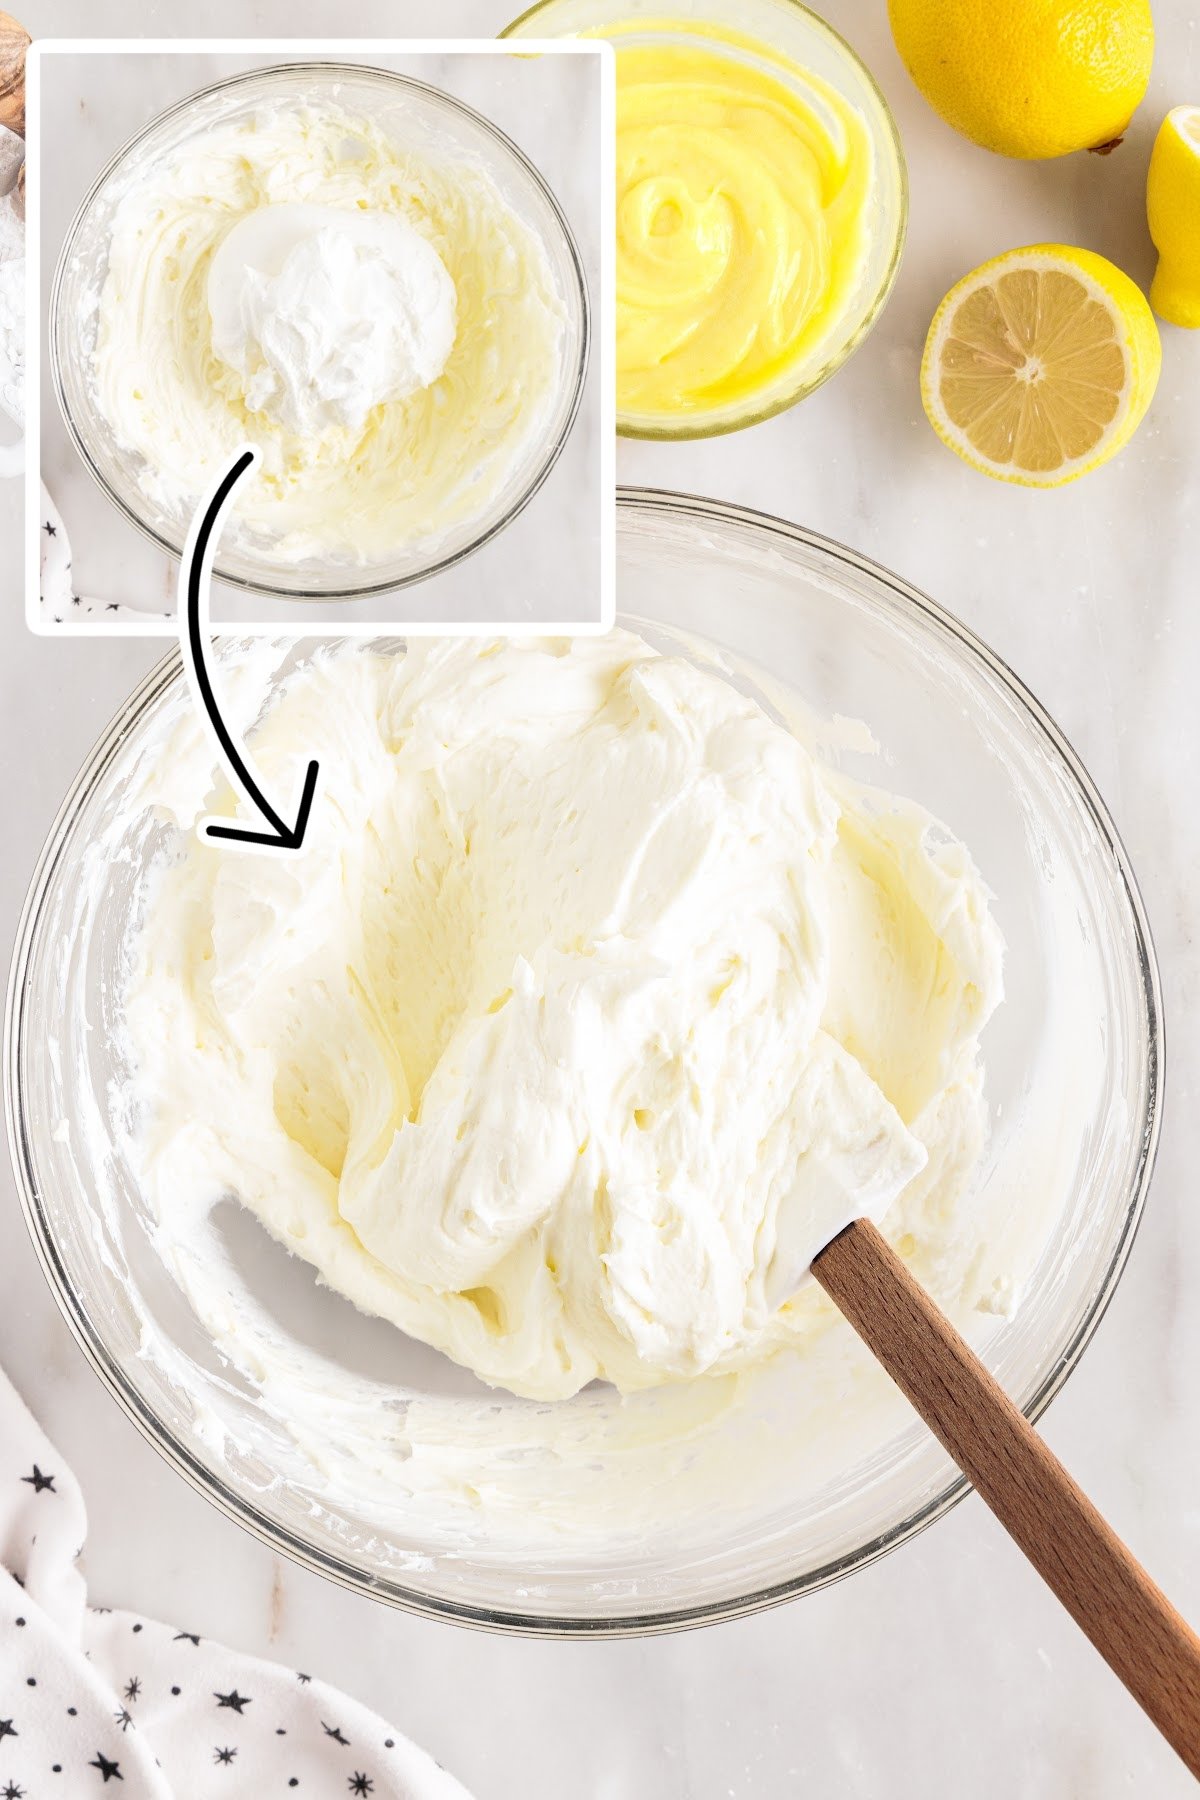 Mixing the whipped cream into the cream cheese mixture.